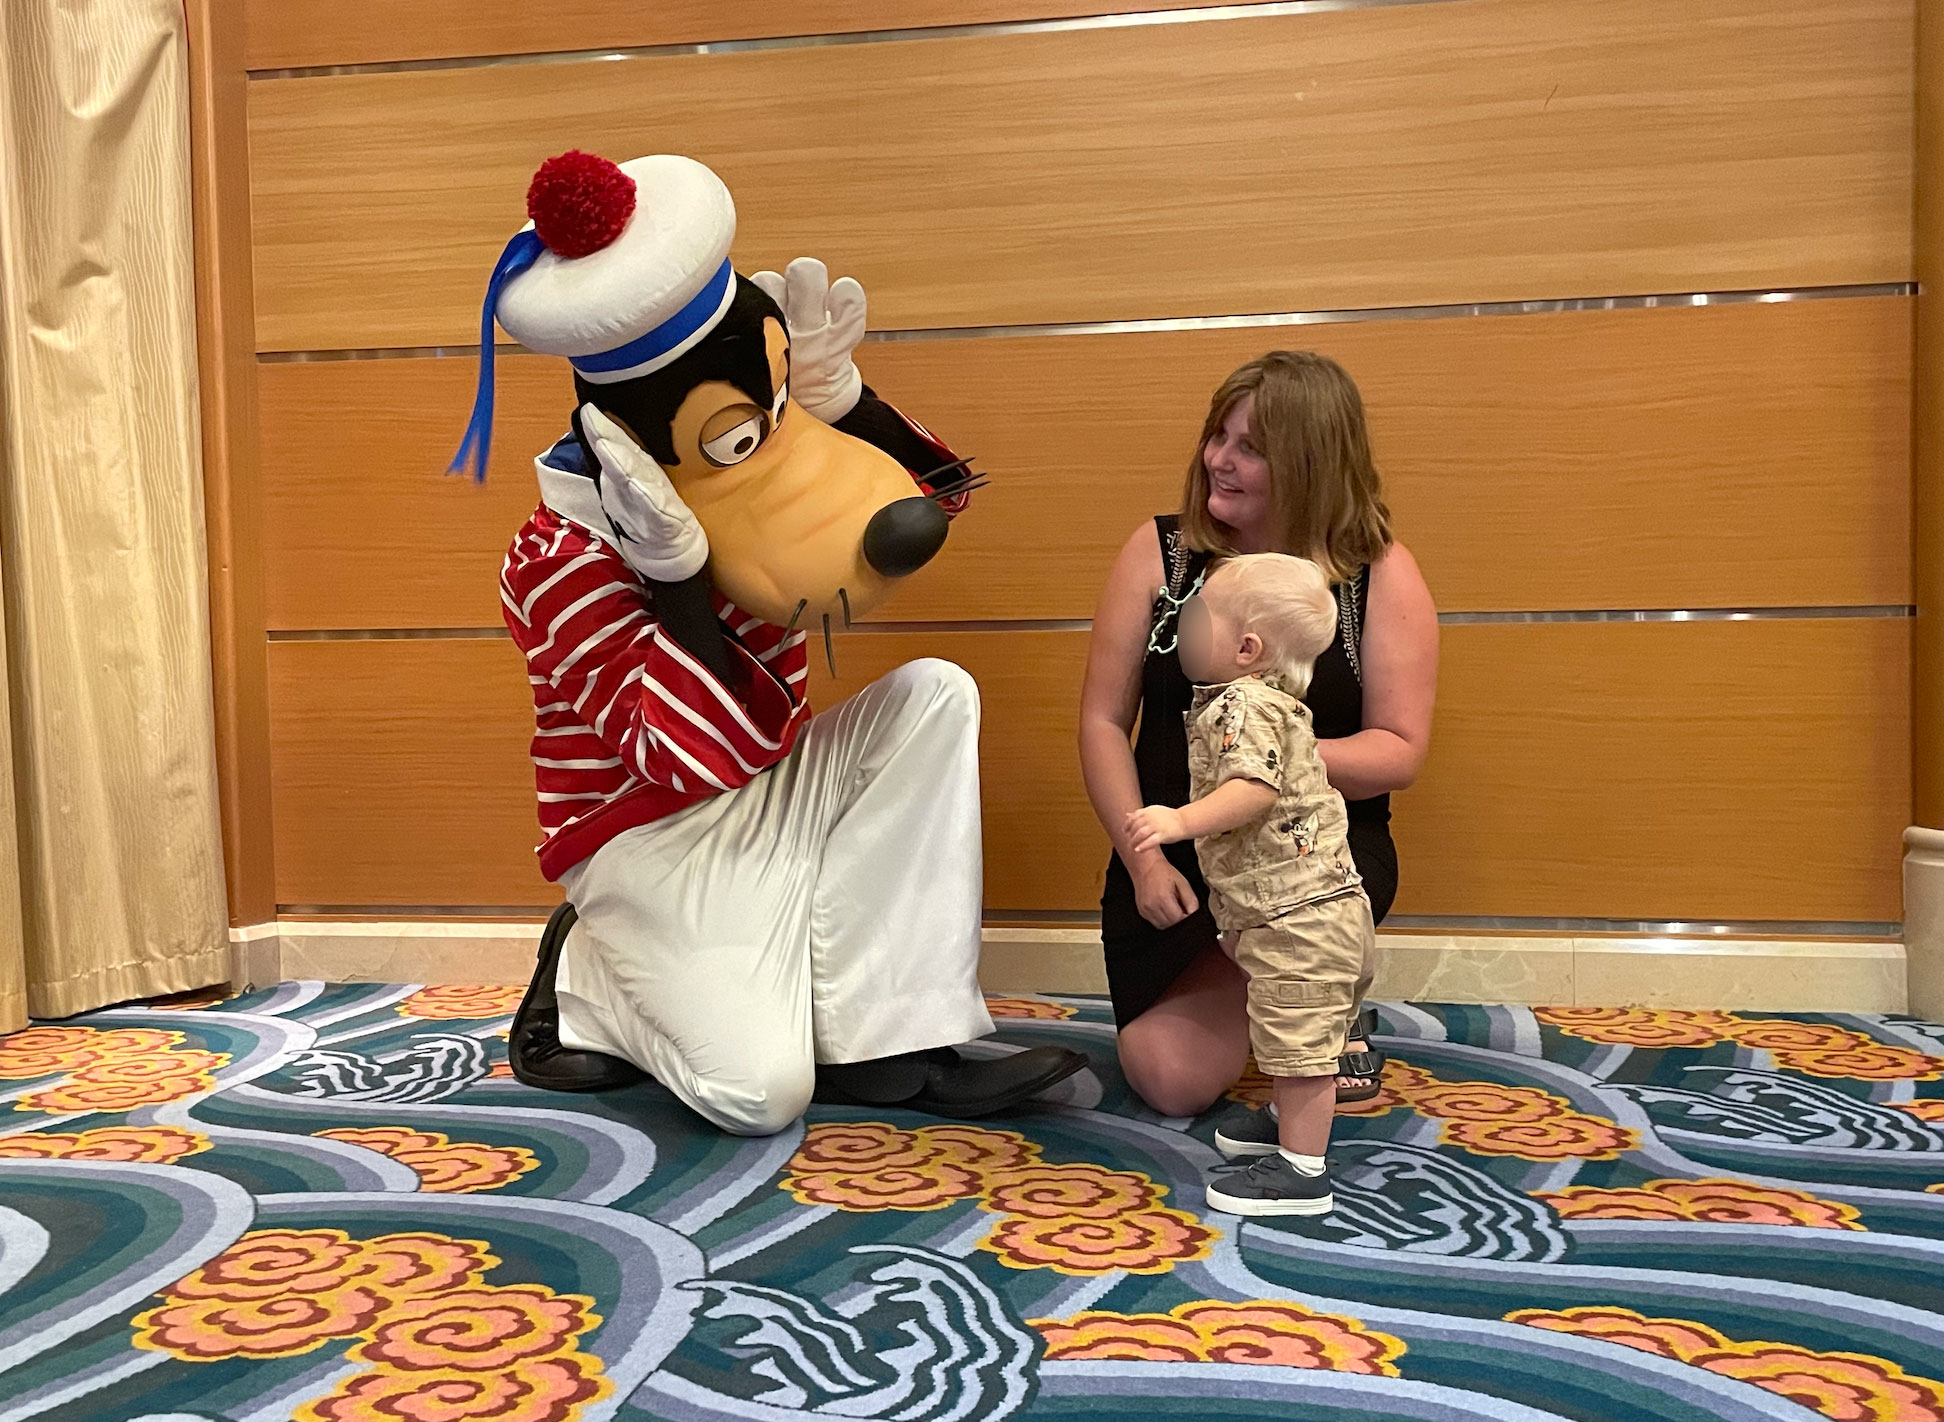 Goofy in a sailor costume playfully interacts with a woman and a toddler on a carpeted floor